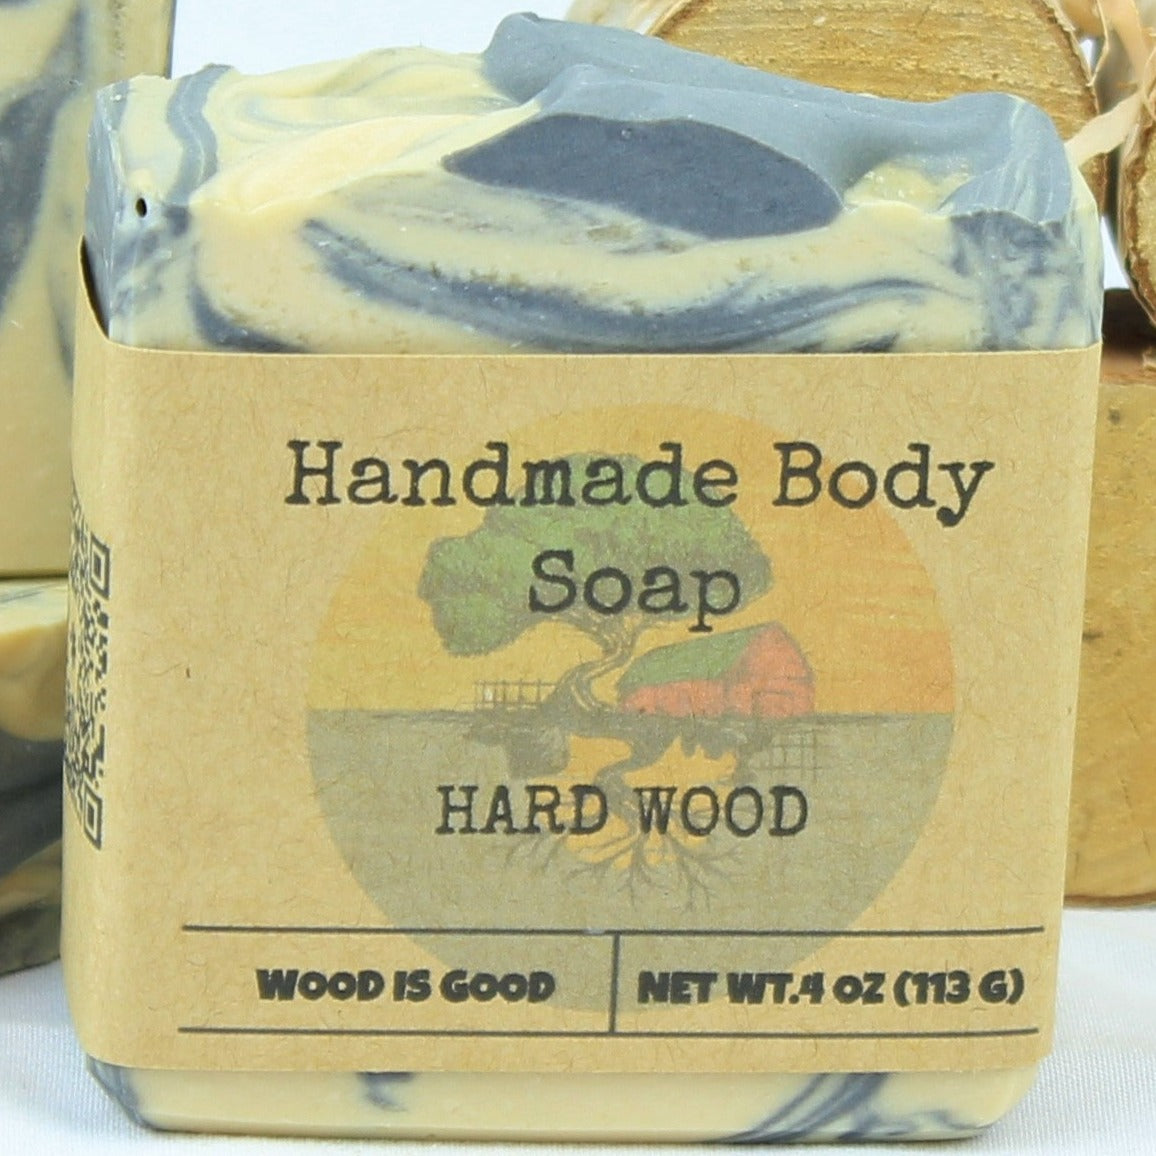 One 4oz bar soap, named Hard Wood, shown with label. 